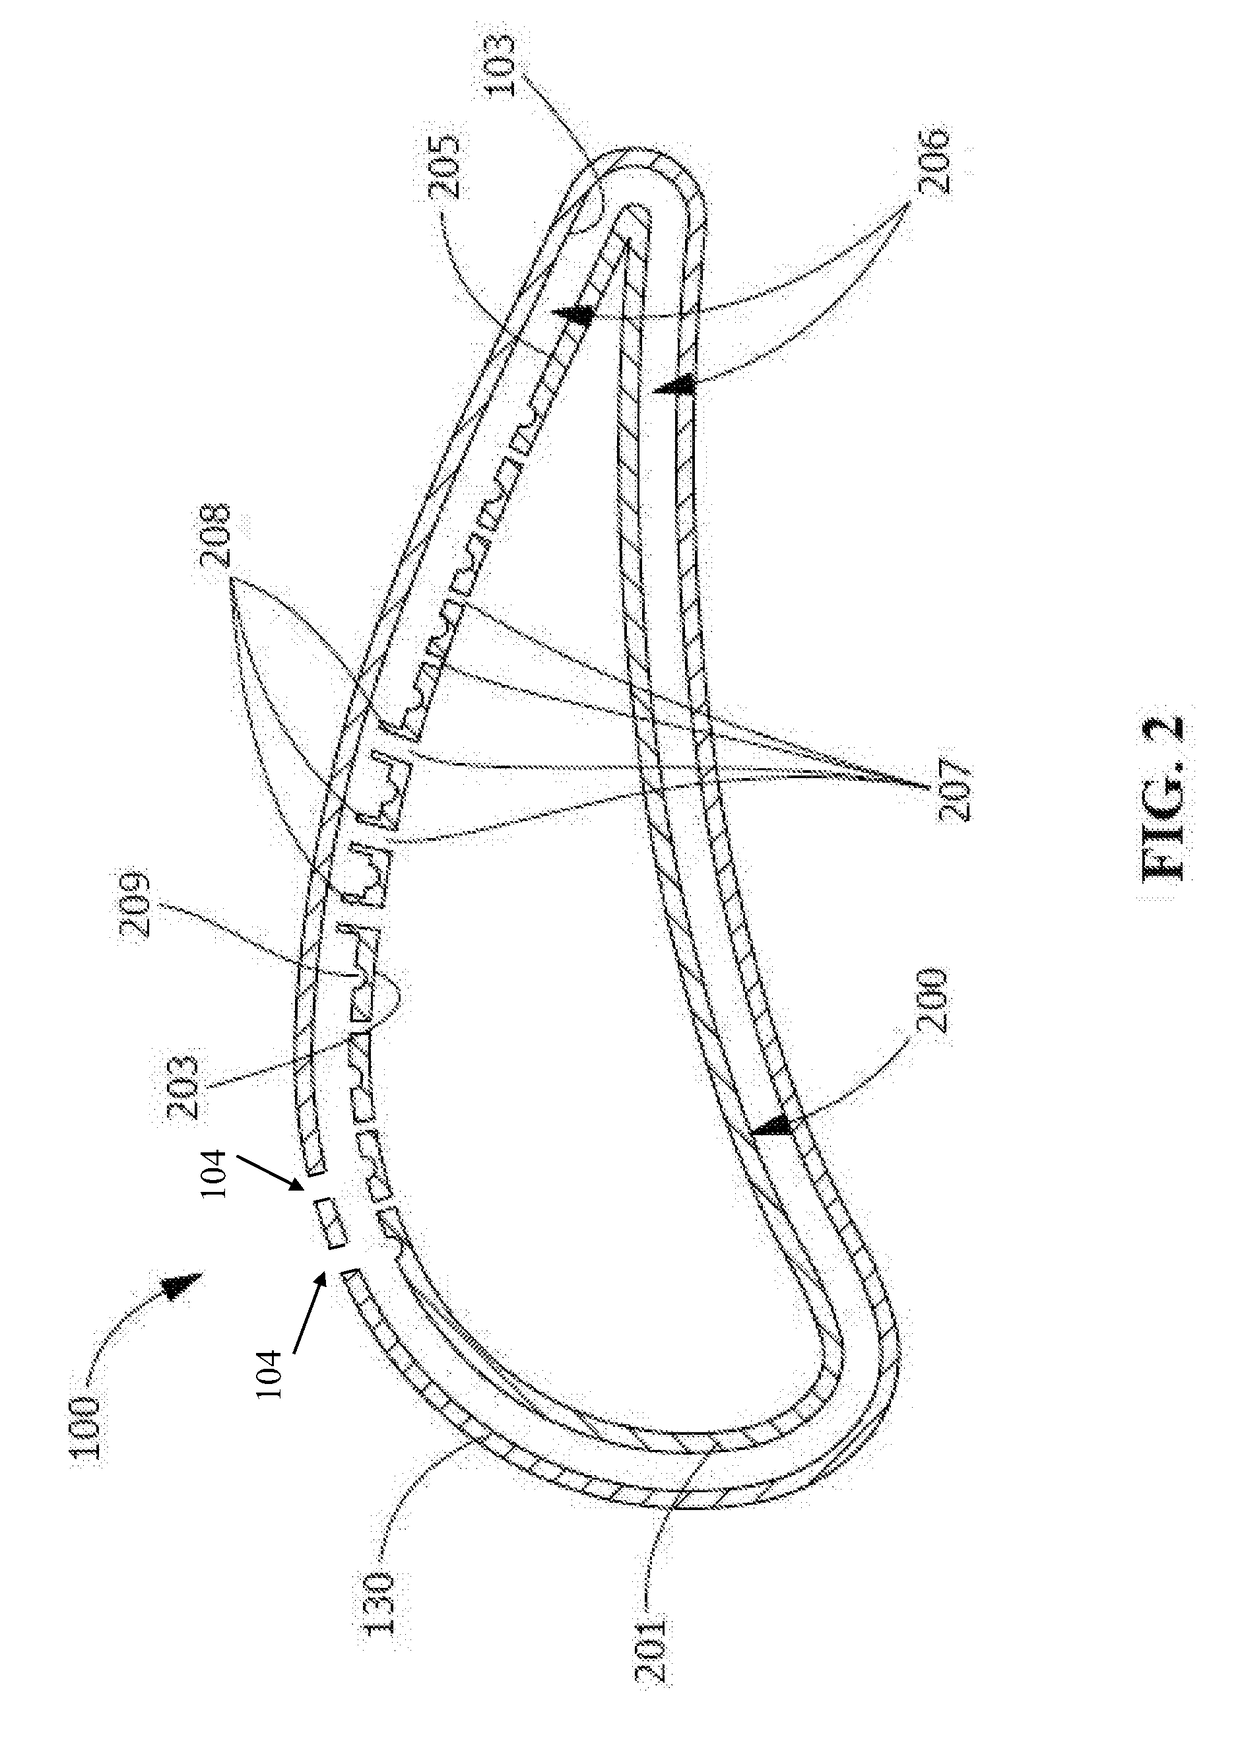 Heat transfer device and related turbine airfoil